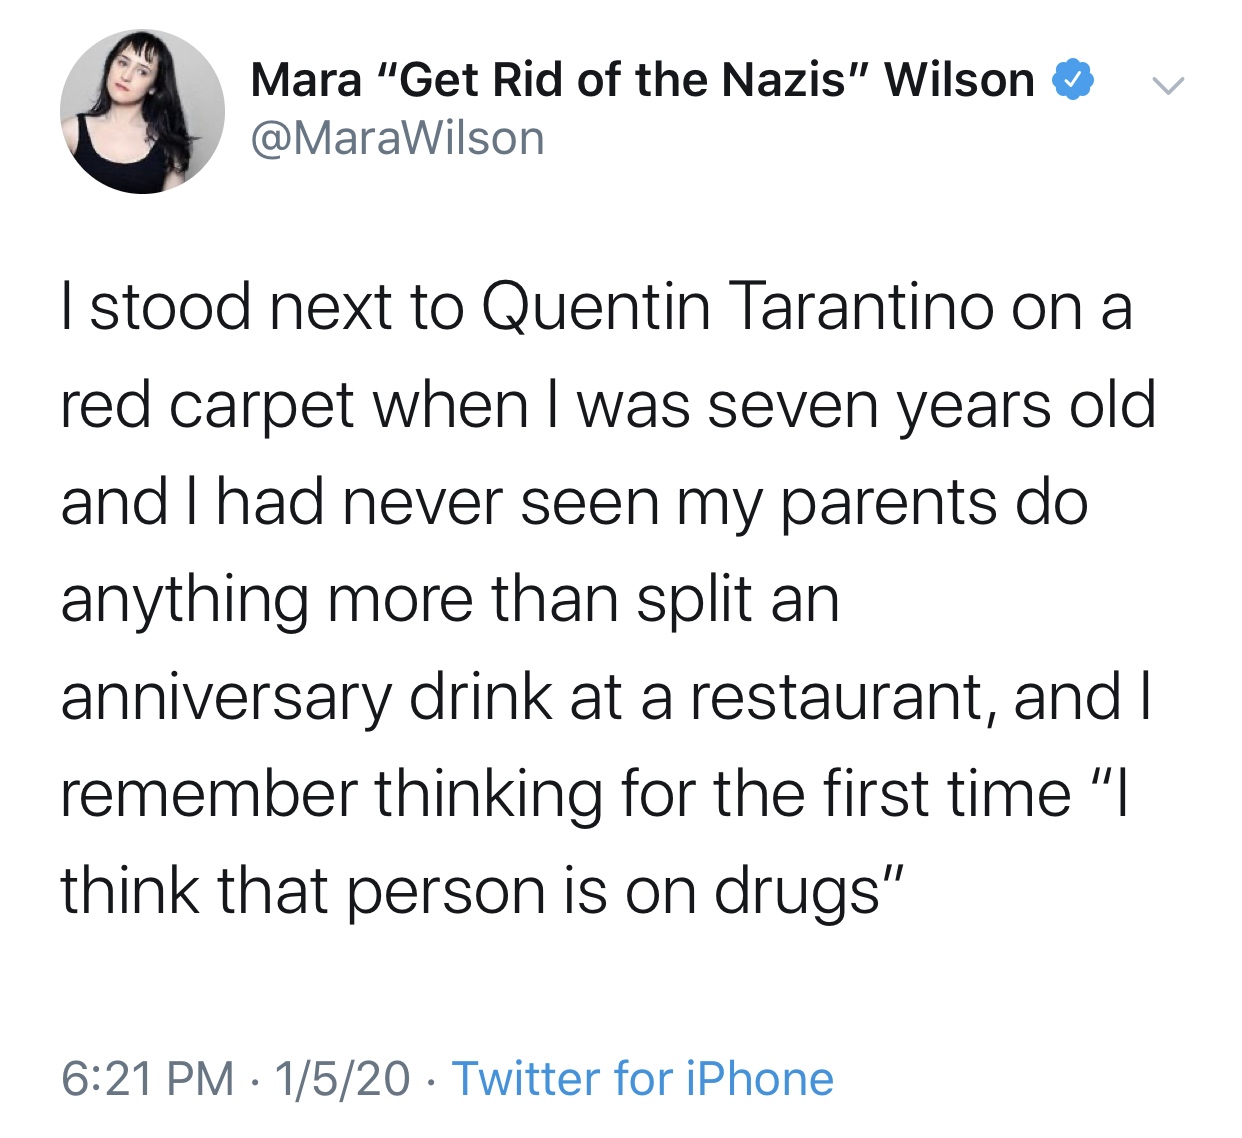 angle - v Mara "Get Rid of the Nazis" Wilson I stood next to Quentin Tarantino on a red carpet when I was seven years old and I had never seen my parents do anything more than split an anniversary drink at a restaurant, and I remember thinking for the fir